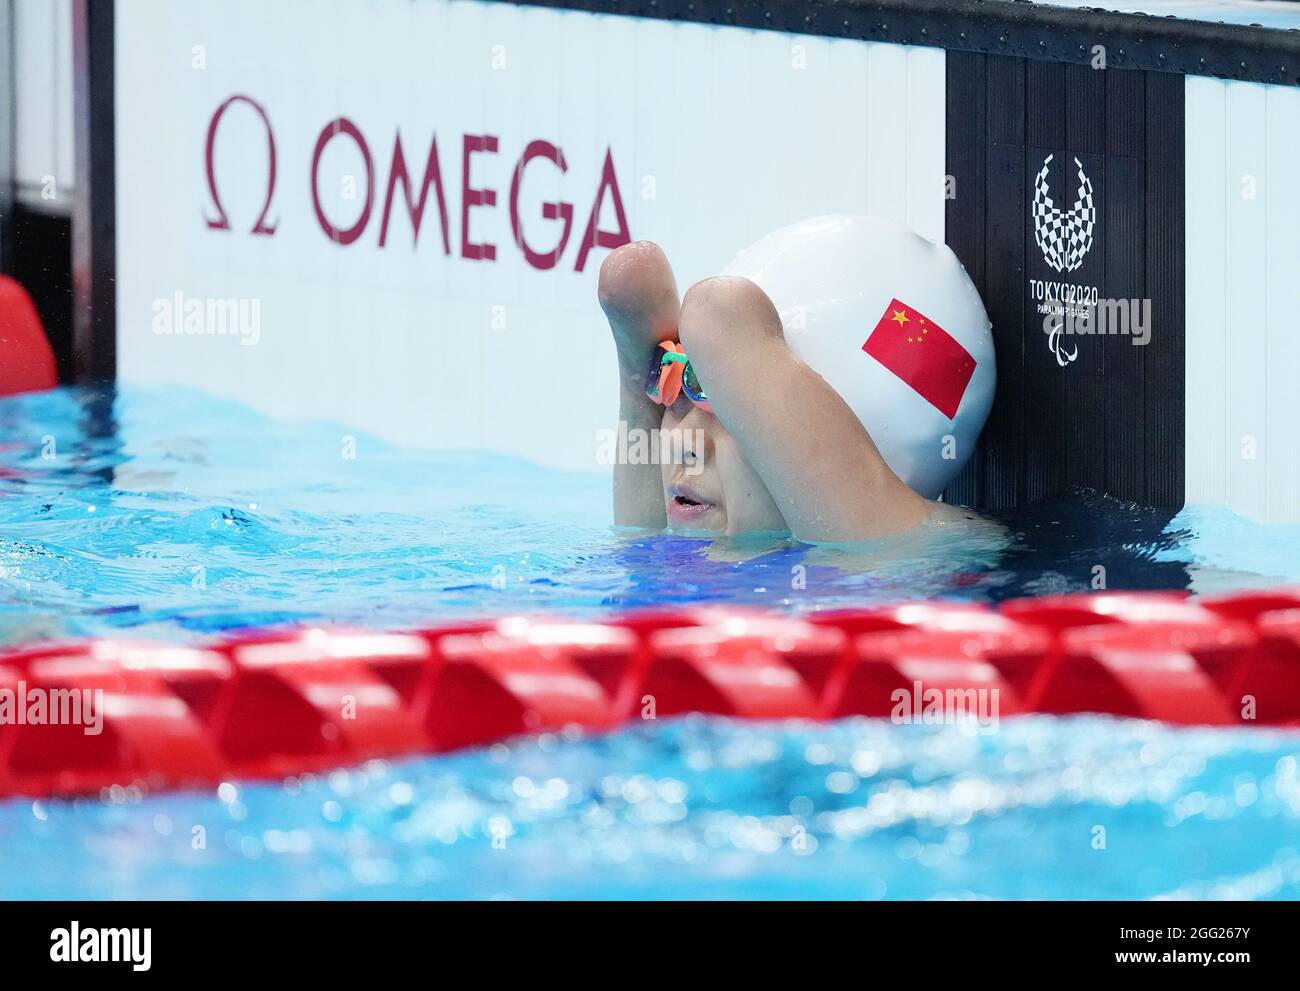 Tokyo, Japan. 28th Aug, 2021. Liu Daomin of China reacts after the women's 100m breaststroke SB6 final of swimming event at the Tokyo 2020 Paralympic Games in Tokyo, Japan, Aug. 28, 2021. Credit: Cai Yang/Xinhua/Alamy Live News Stock Photo